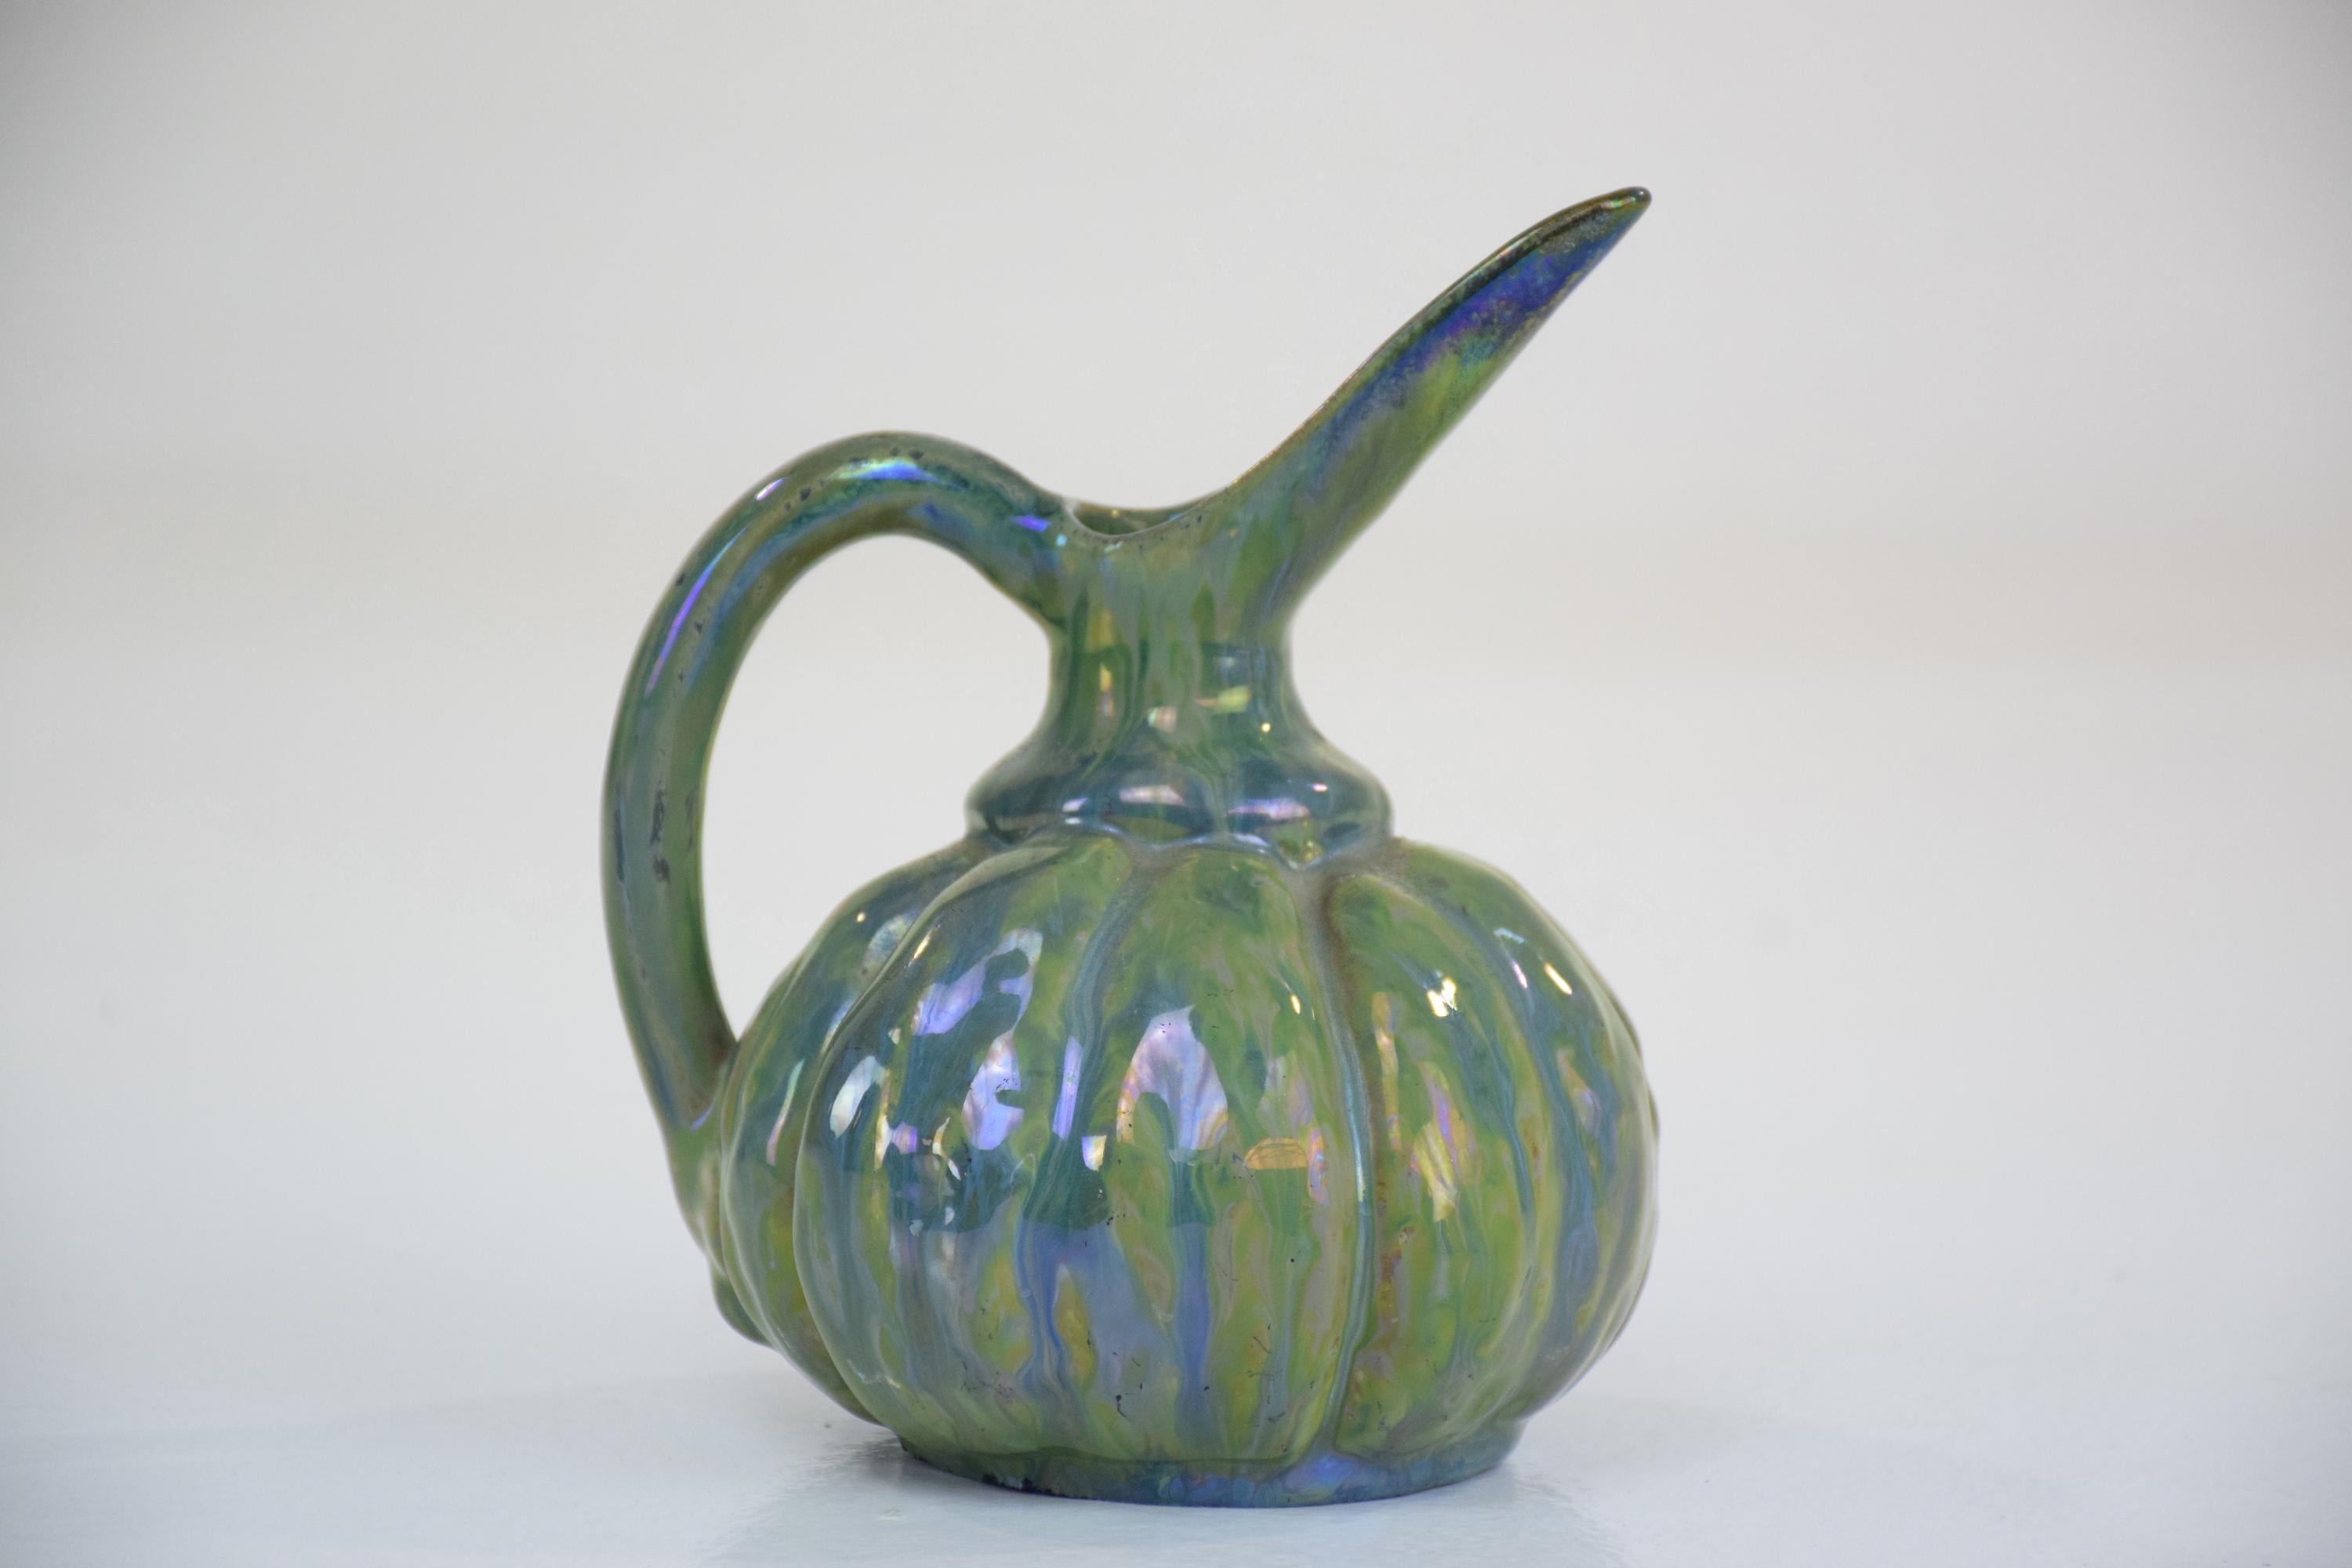 A 20th century French vintage collectible pitcher or jug of circular shape crafted in a green iridescent color,
France, 1910.
Signed at reverse Alphonse Cytère, a notable ceramist who invented the metallic effect on ceramic. 

1903 Alphonse